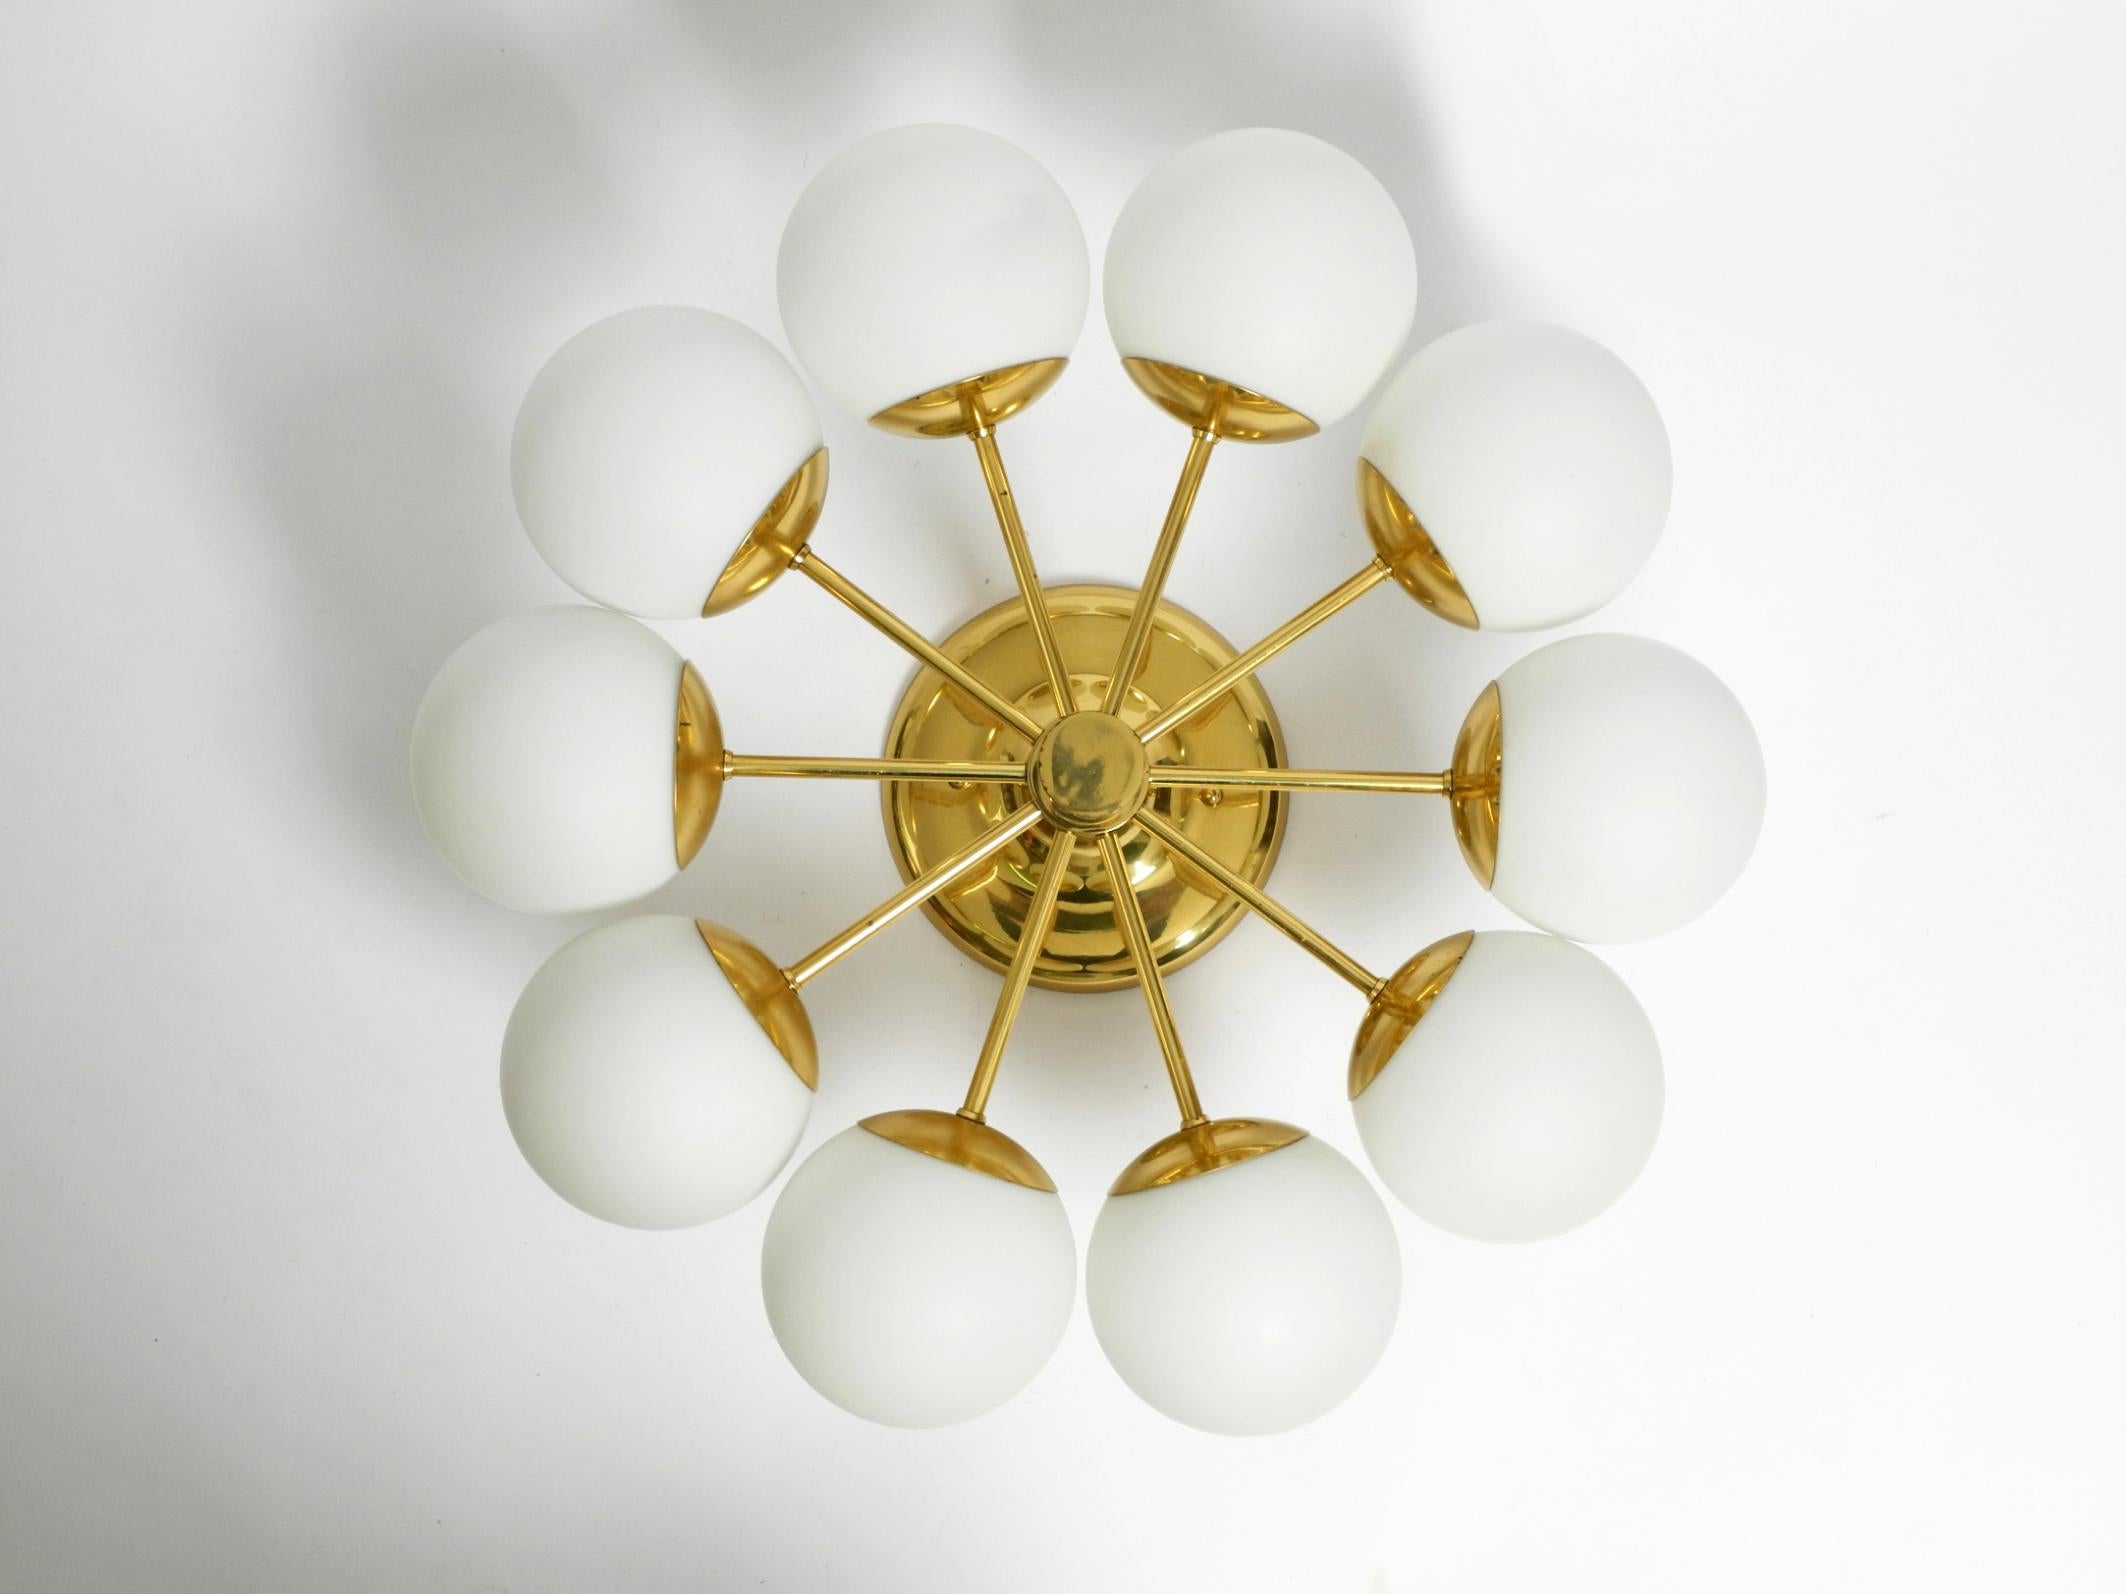 Beautiful brass ceiling light from 1960 with 10 white opal glass balls.
Manufacturer is Kaiser Leuchten. Made in Germany.
Great sixties Space Age Atomic design.
Very good vintage condition. Very little signs of use. Light patina.
The brass frame is